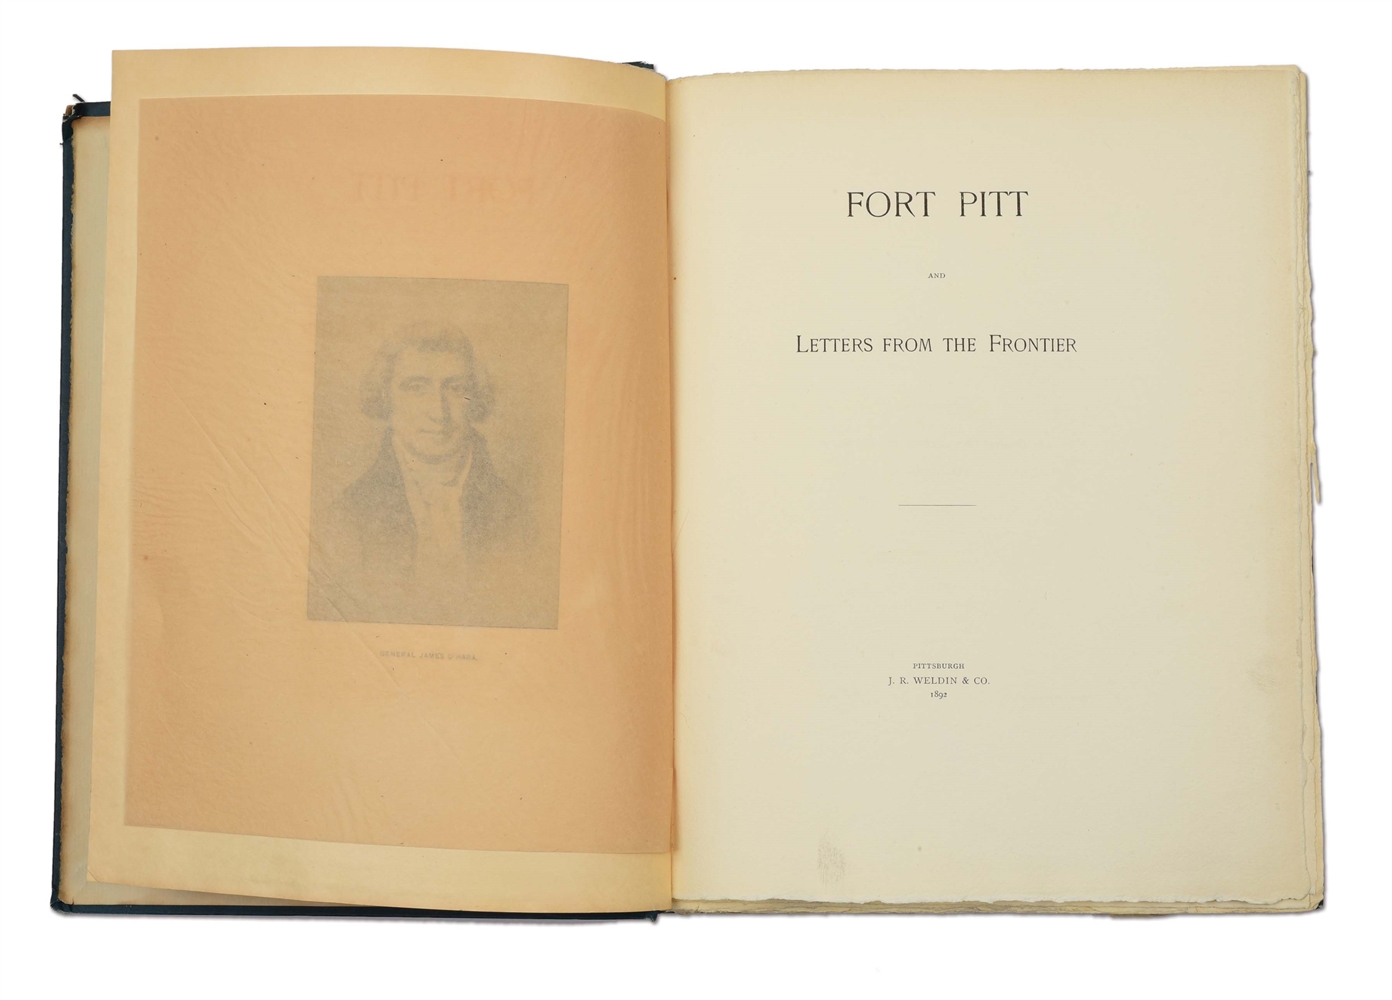 DARLINGTONS "FORT PITT AND LETTERS FROM THE FRONTIER," 1892.